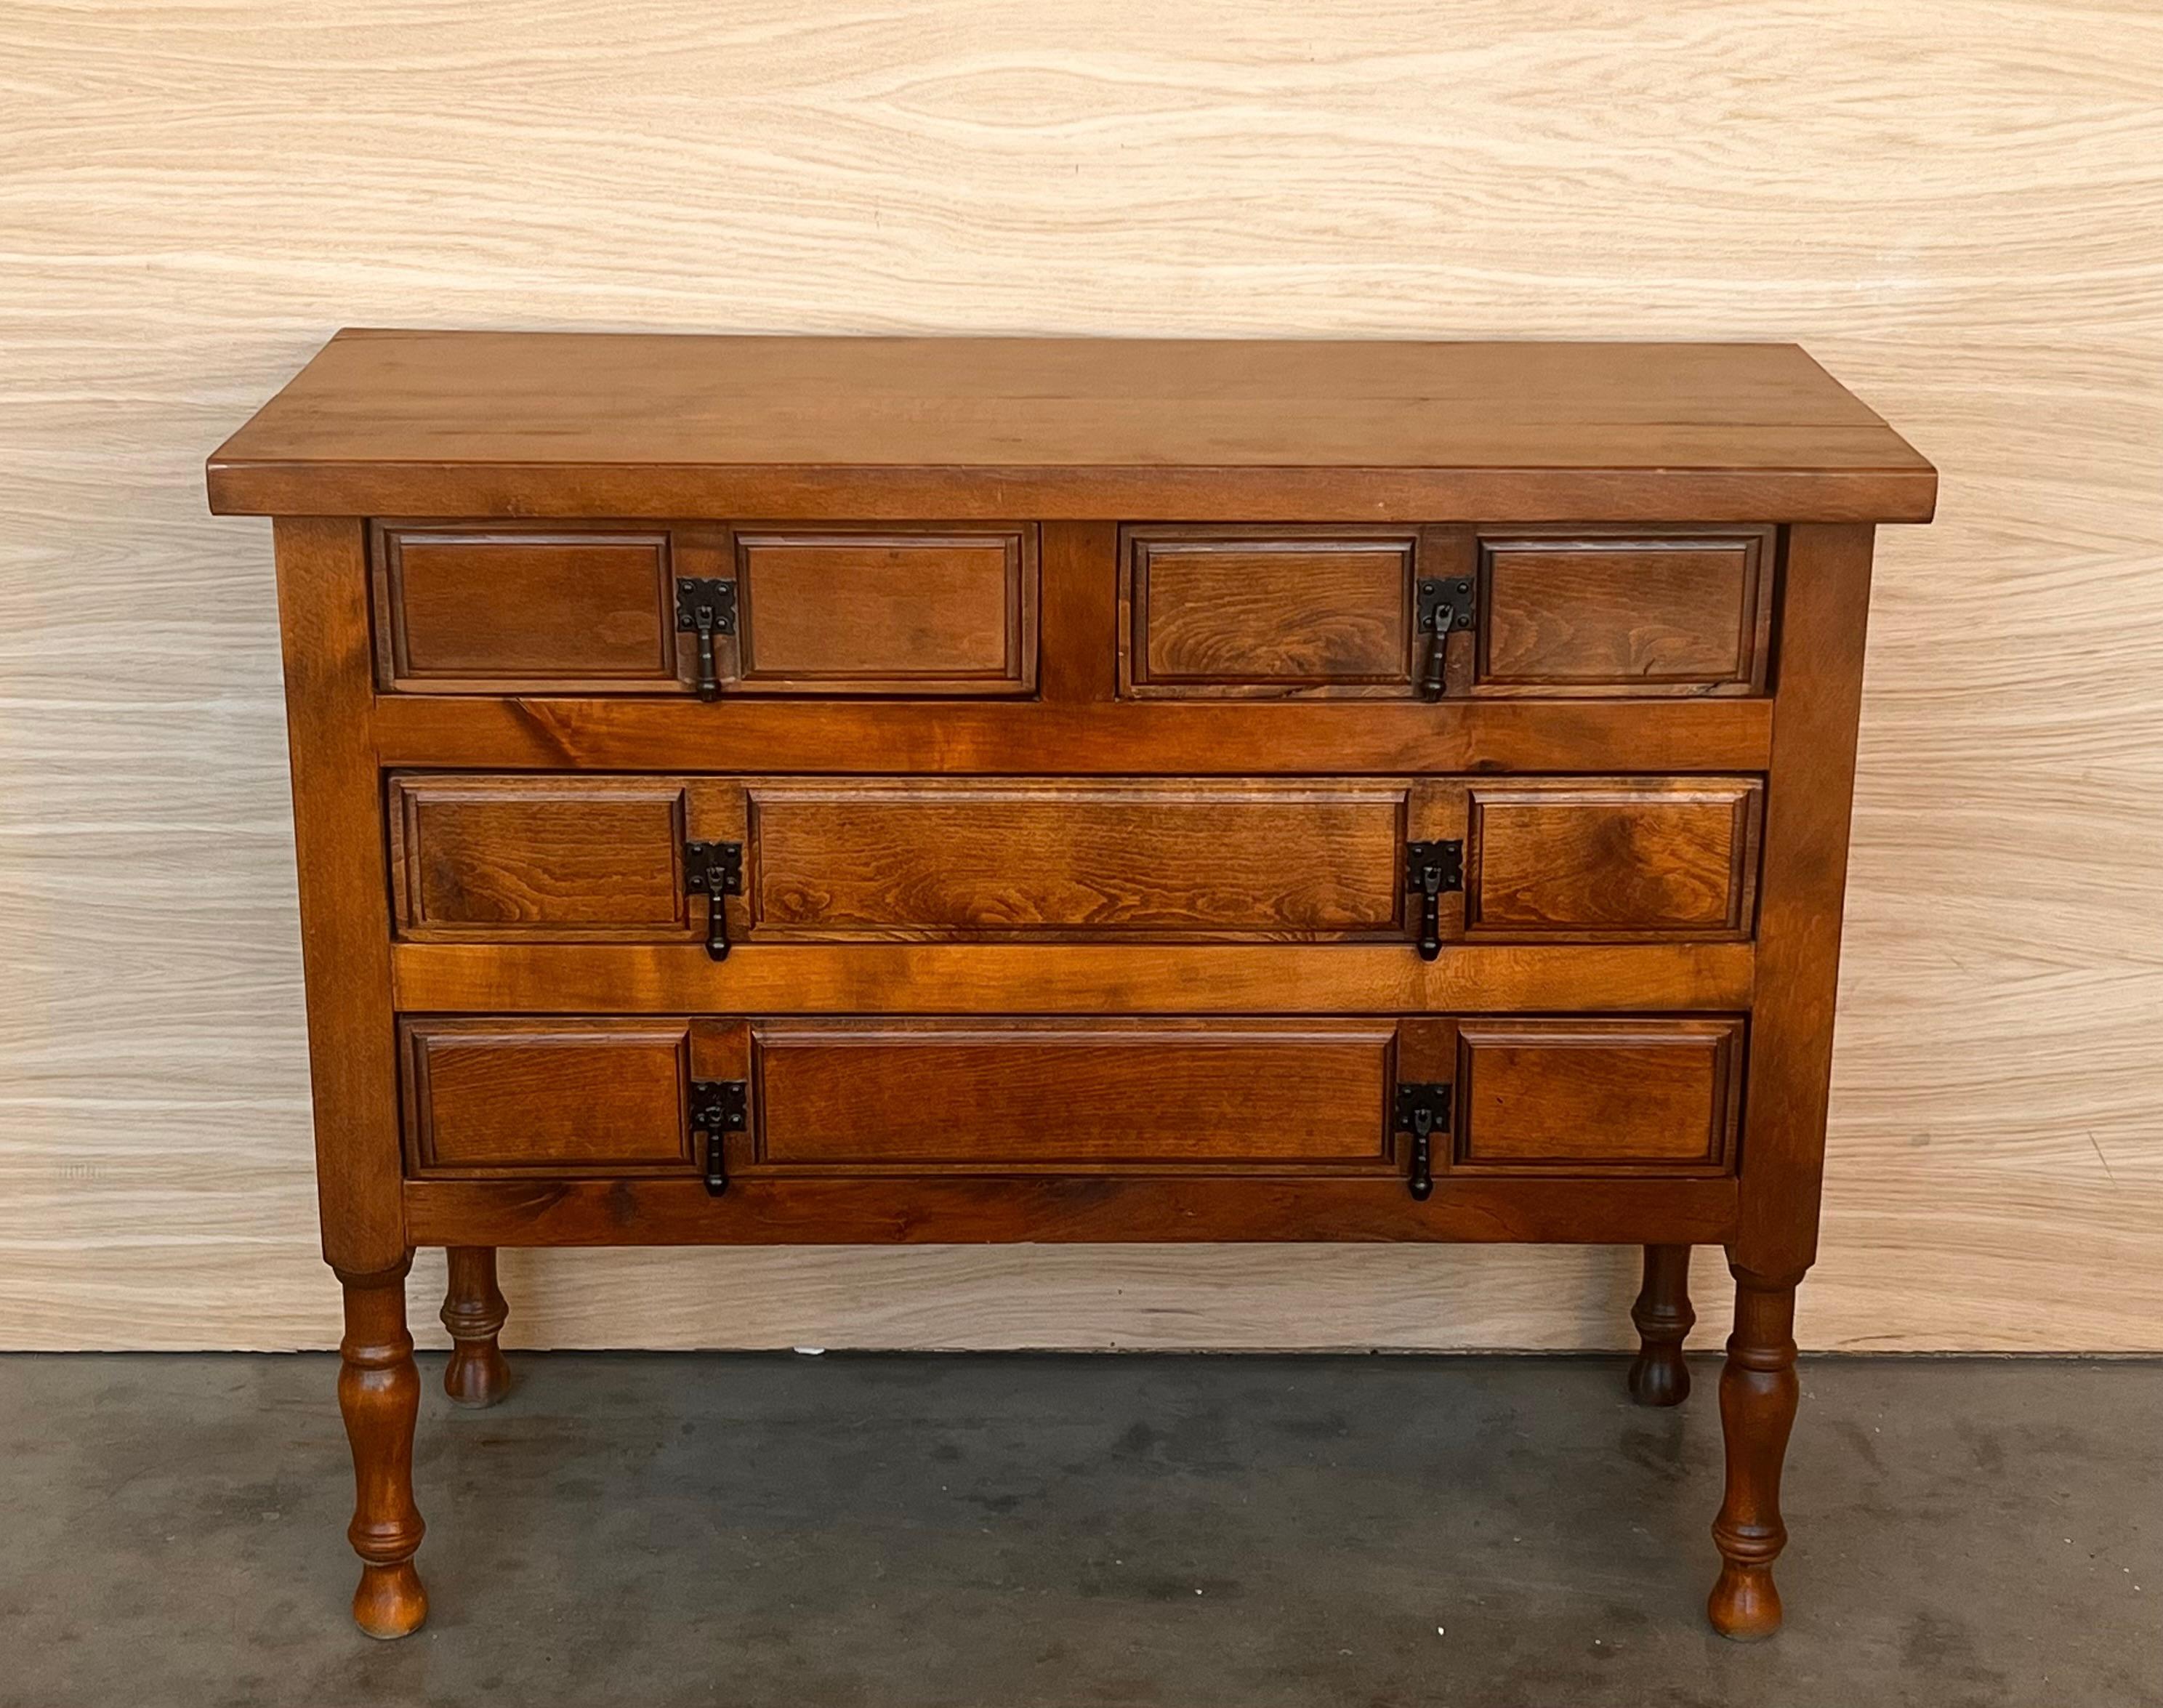 19th century Spanish antique walnut chest of four drawers and original iron hardware.
You can use like a commode or chest of drawers
This elegant console was crafted in Spain, circa 1890. The sofa table with four legs features a four carved drawers